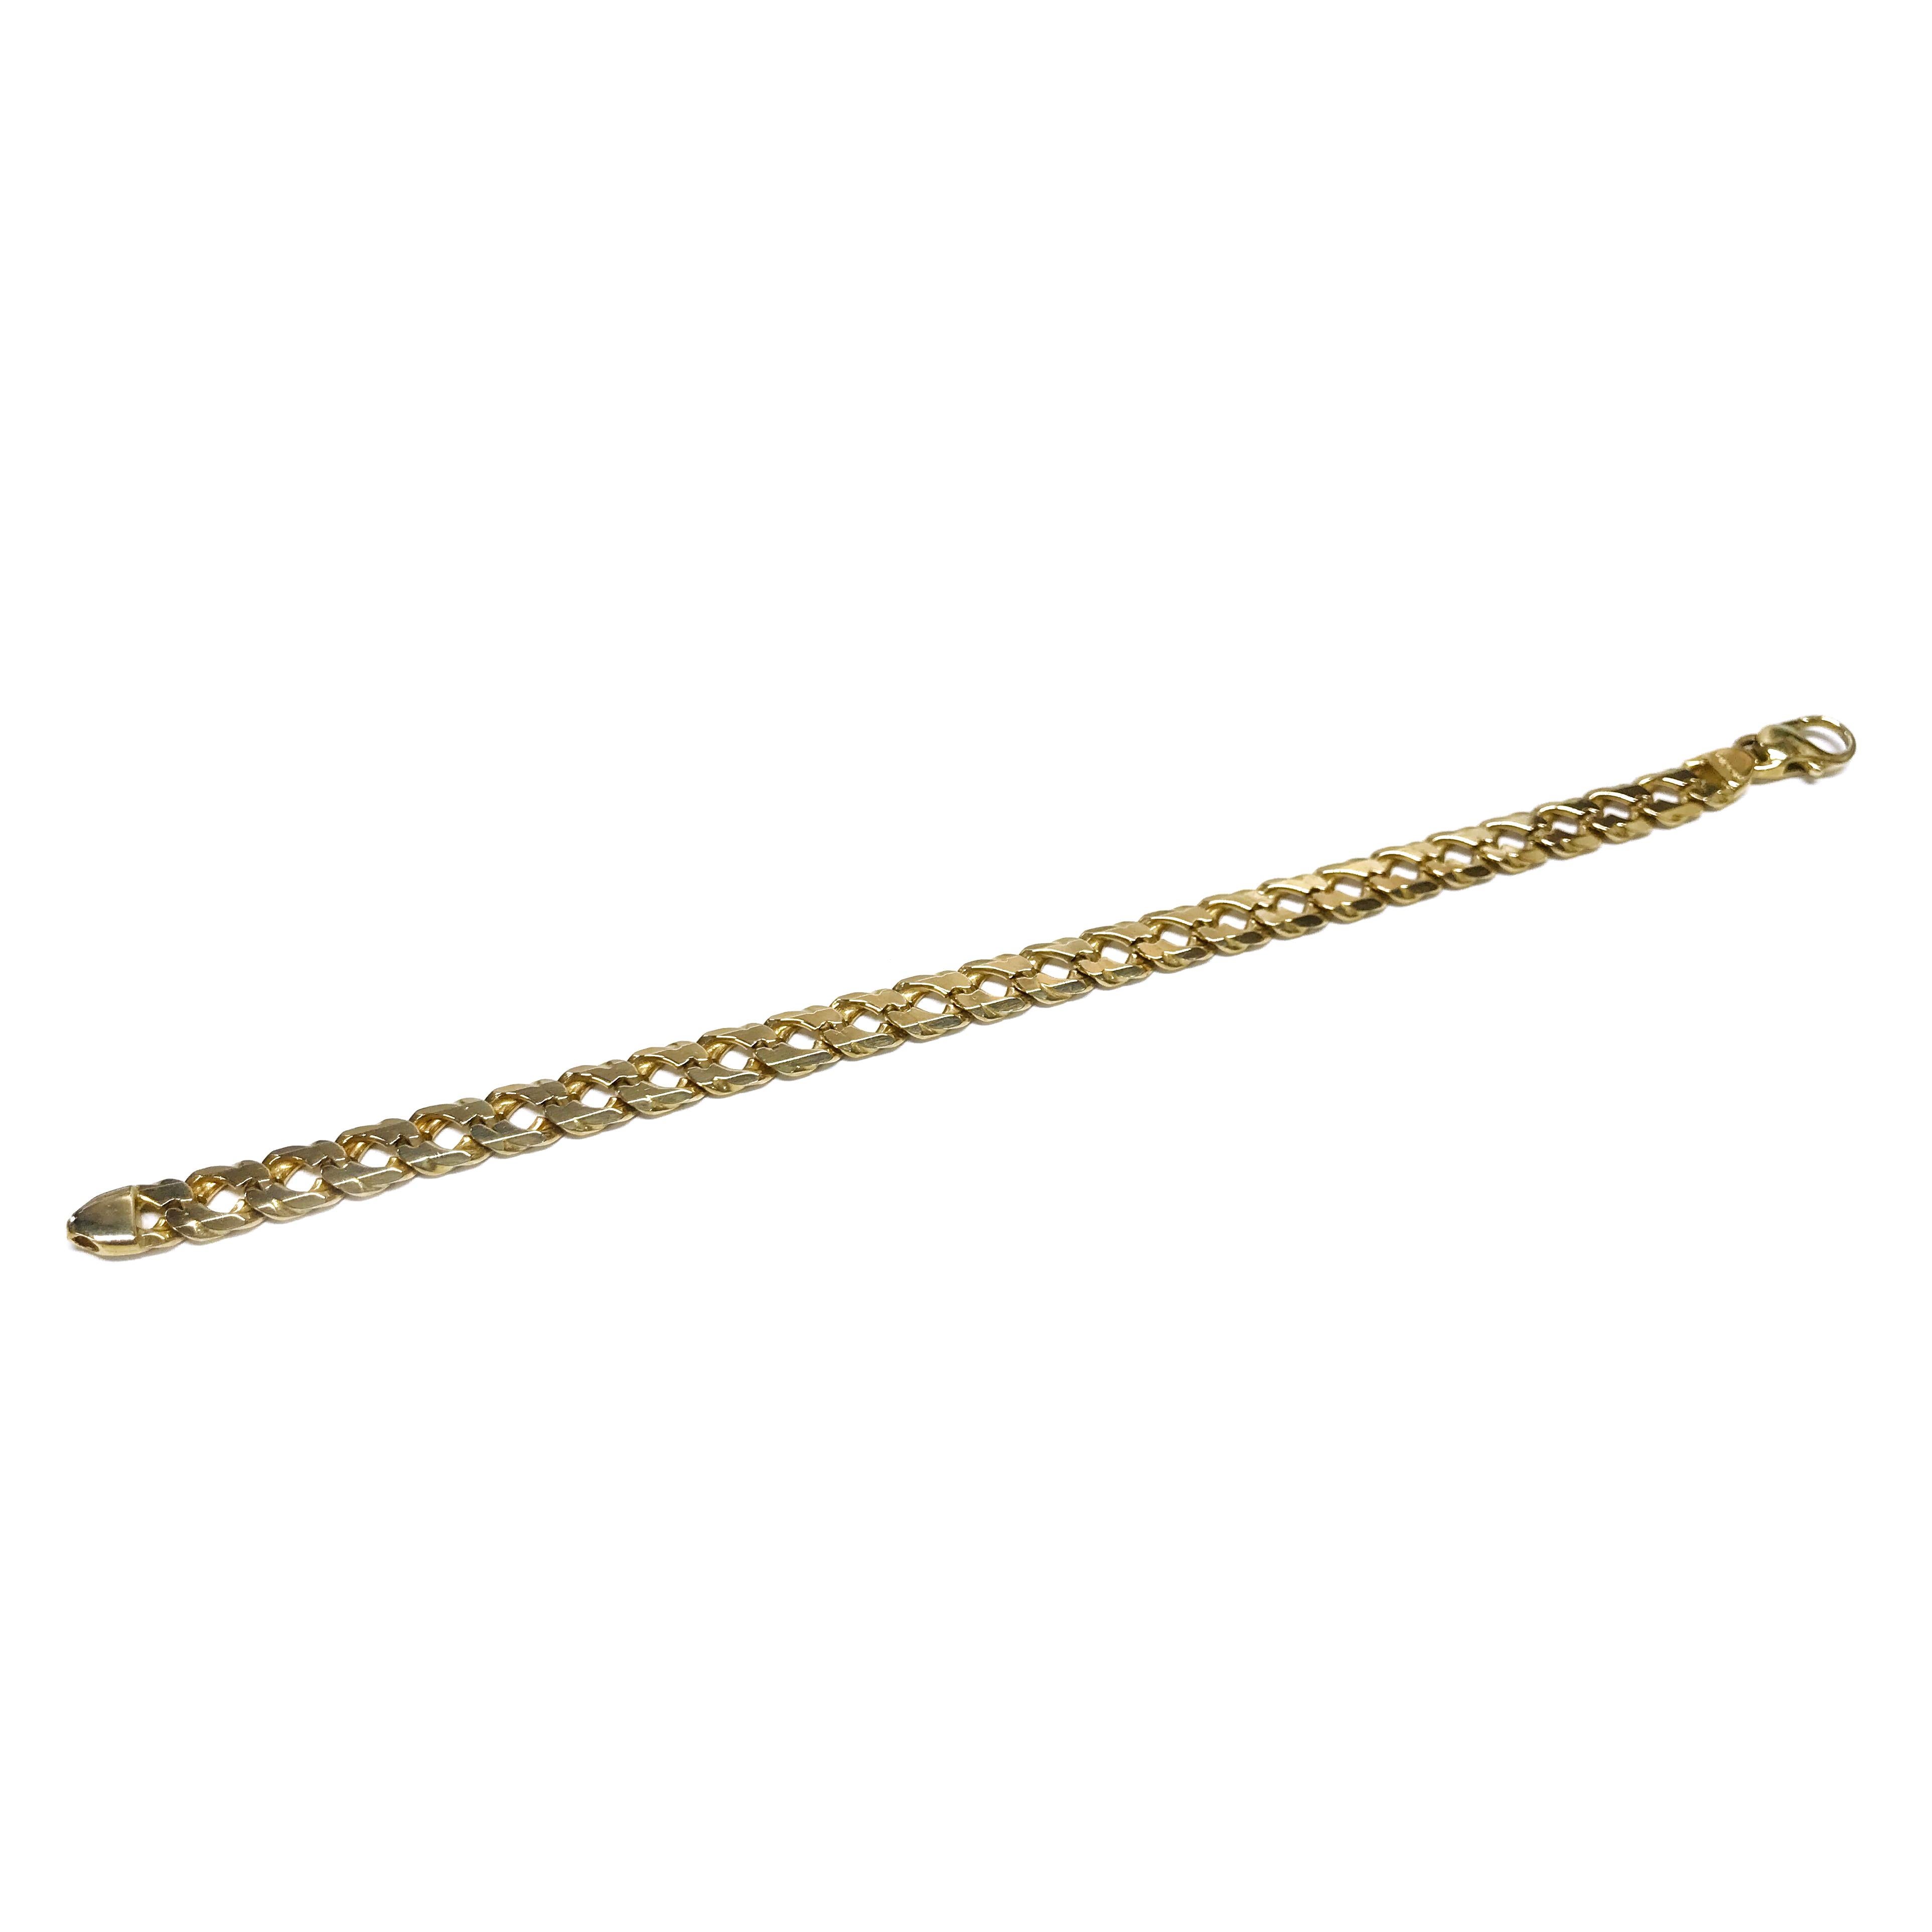 14 Karat Beveled Curb-Link Bracelet. This bracelet features 7.5mm beveled curb links. The top of the bracelet is a shiny finish while the bottom is a matte finish. The bracelet is 8.5